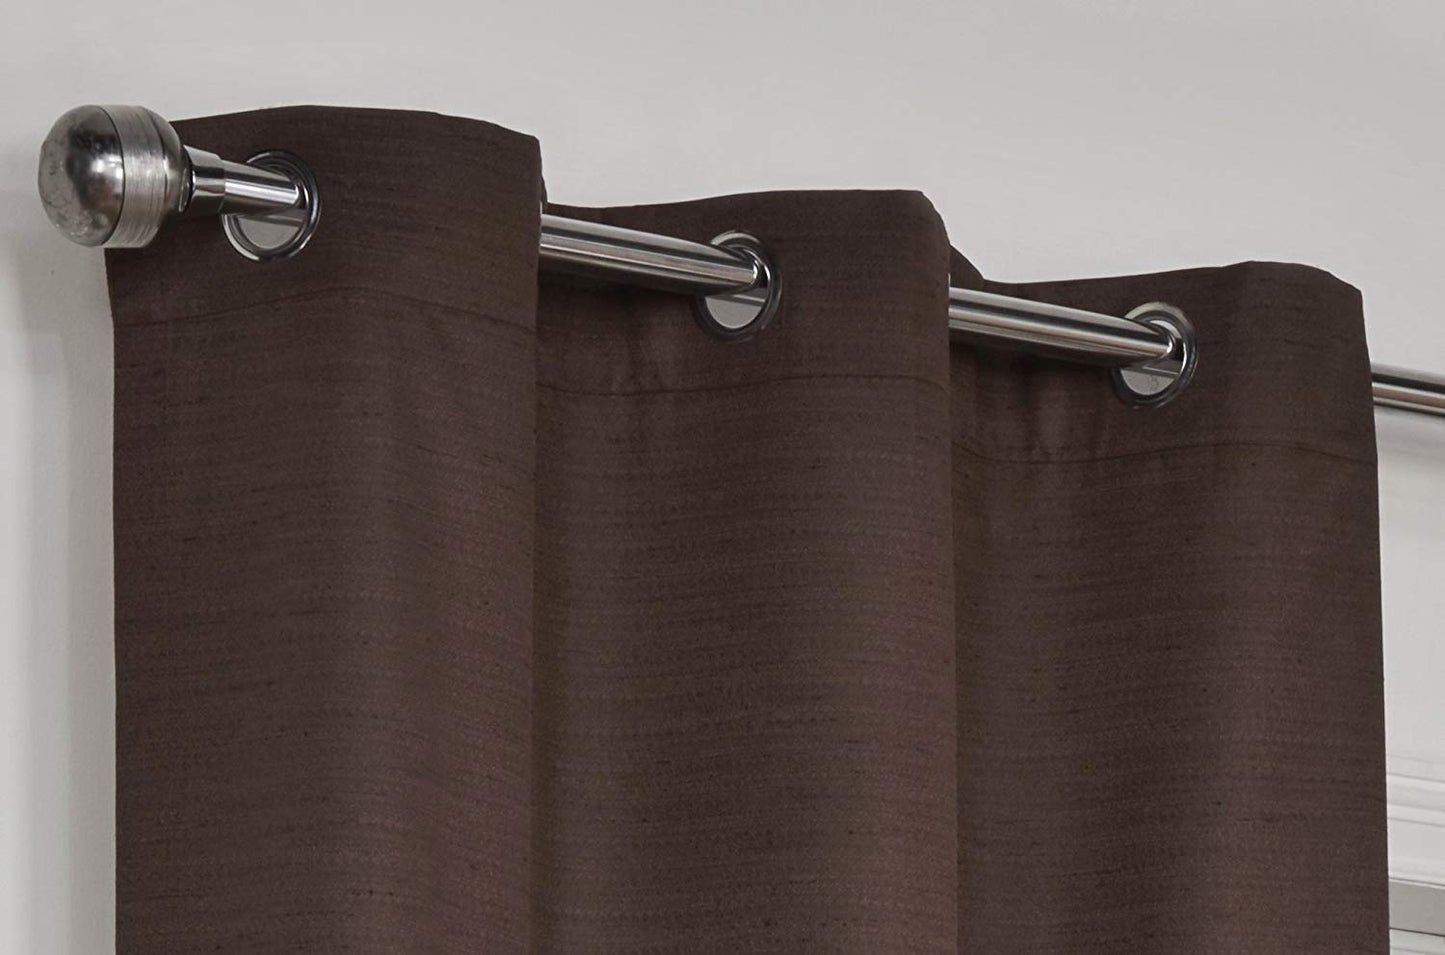 Lunar Chocolate Brown 46" x 72" Eyelet Unlined Ready Made Curtains